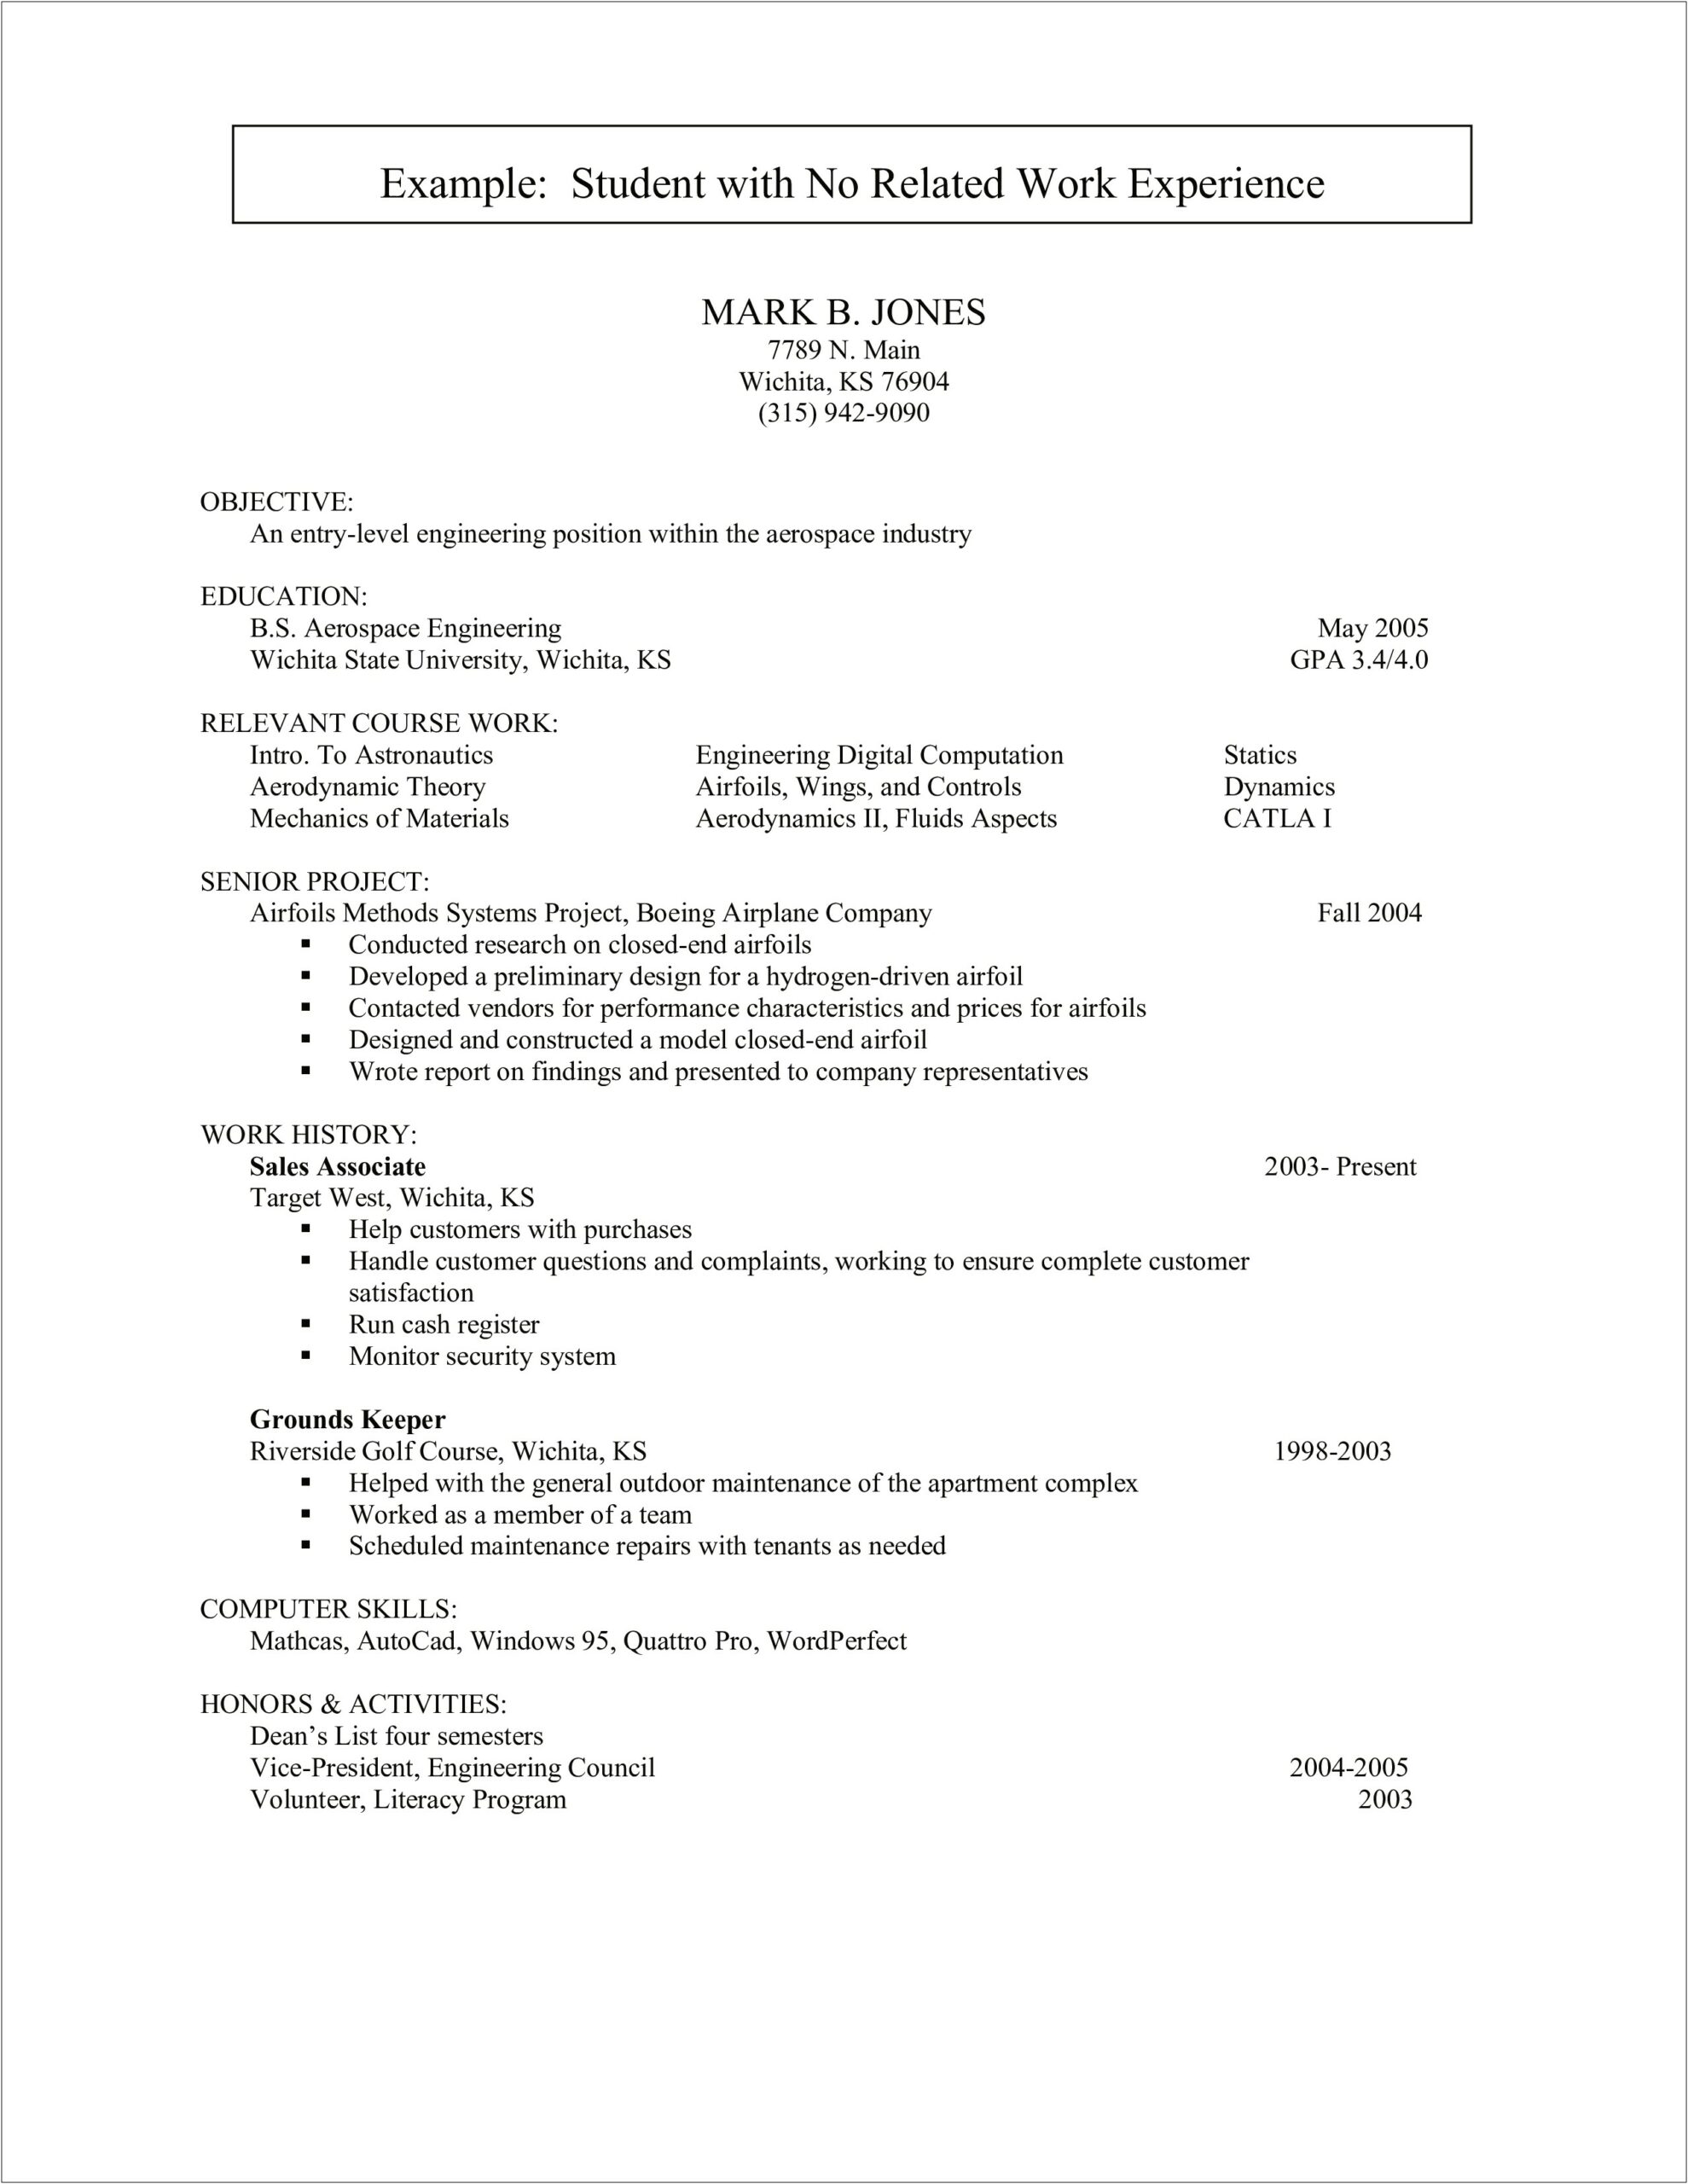 Sample Resume With An Objective